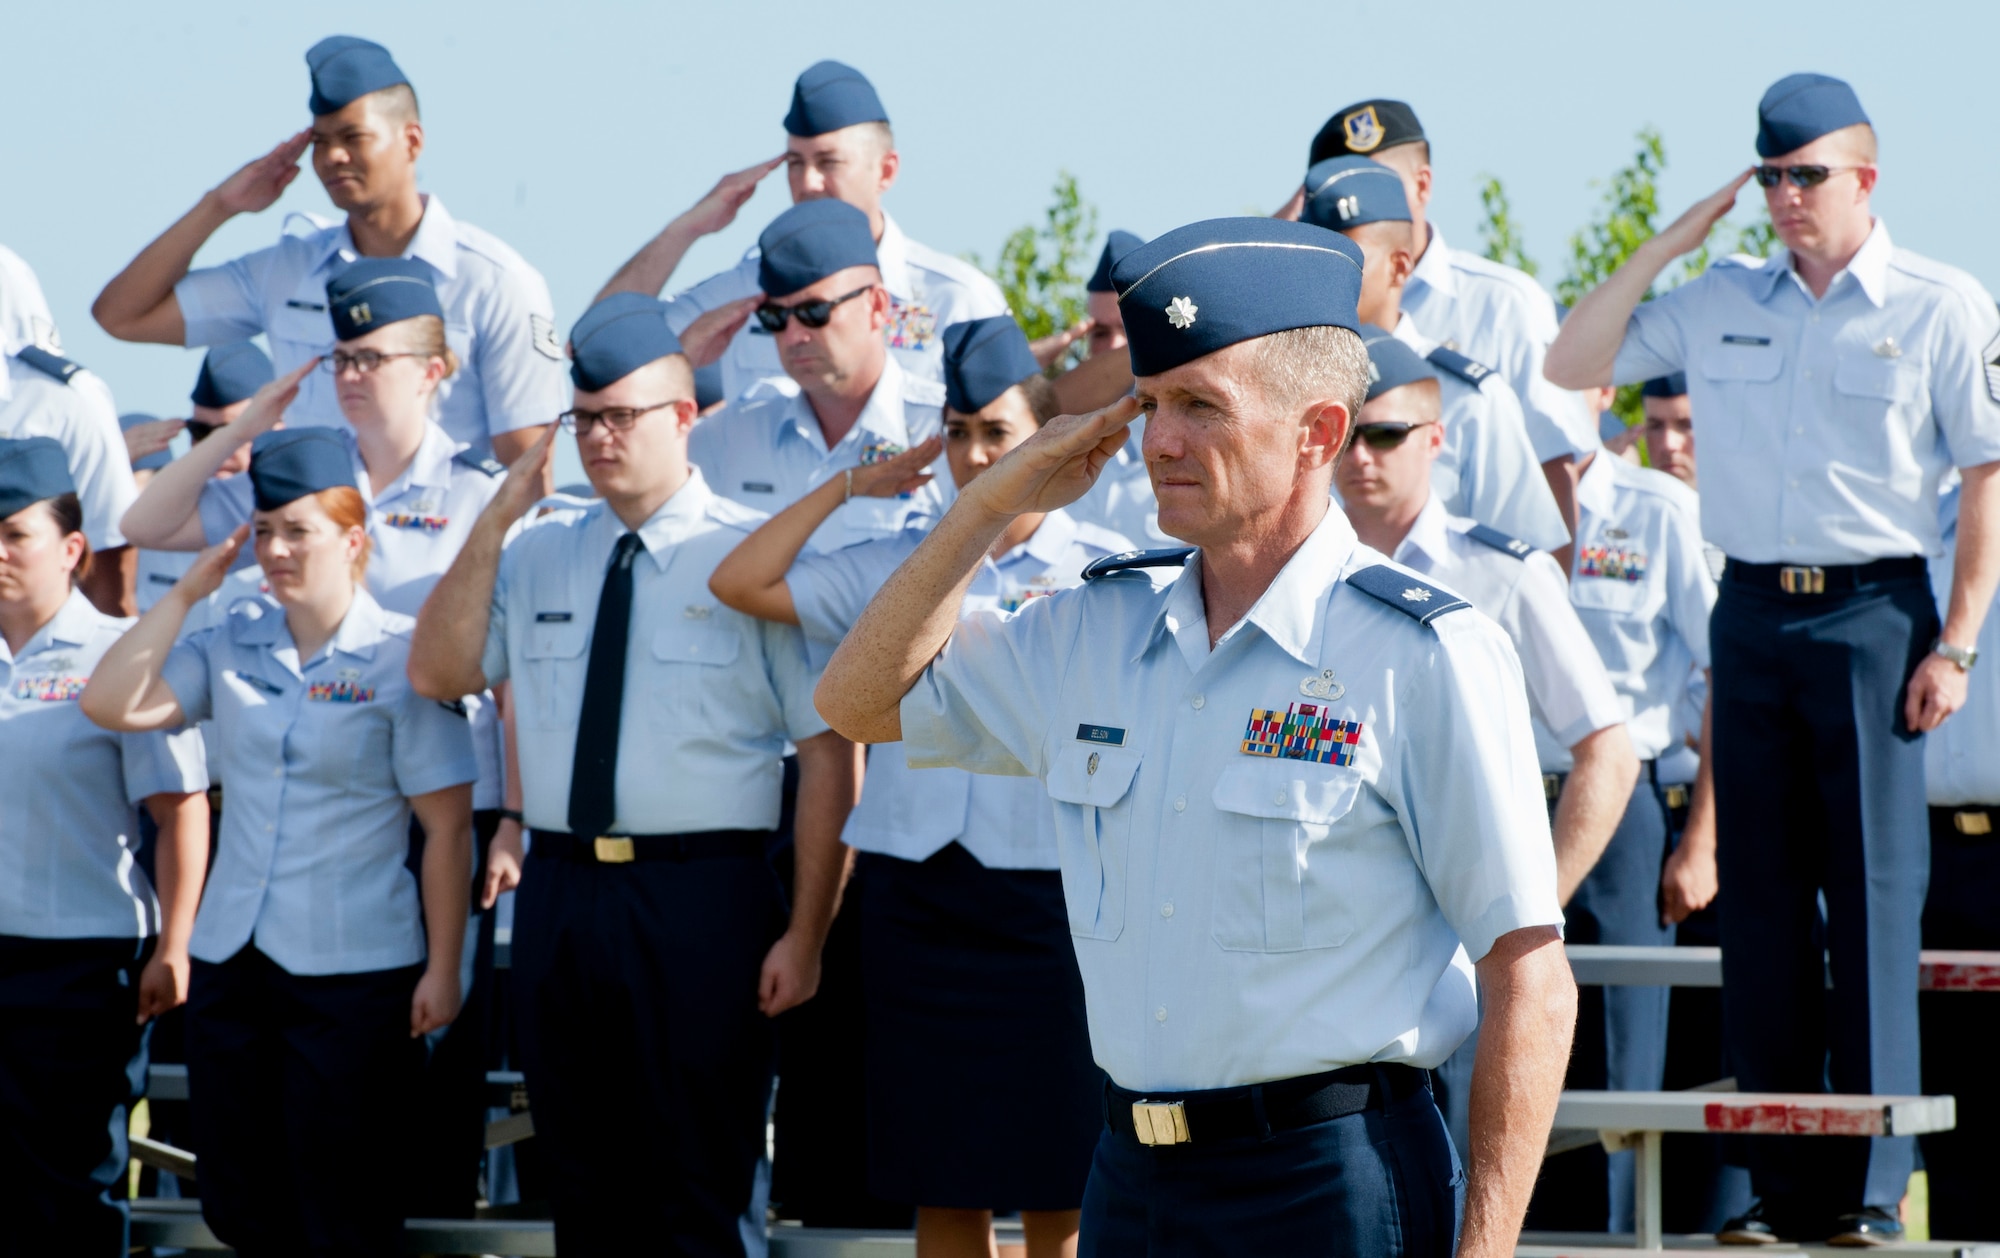 Lt. Col. Brian Belson, deputy commander of the 65th Air Base Group, salutes during the 65th Air Base Wing’s Redesignation Ceremony on Lajes Field, Azores, Portugal, August 14, 2015. With this Redesignation Ceremony the 65th Air Base Group is now aligned under the 86th Airlift Wing and remains positioned to provide agile combat support and services to aircraft and aircrews. (U.S. Air Force photo by Master Sgt. Bradley C. Church) 